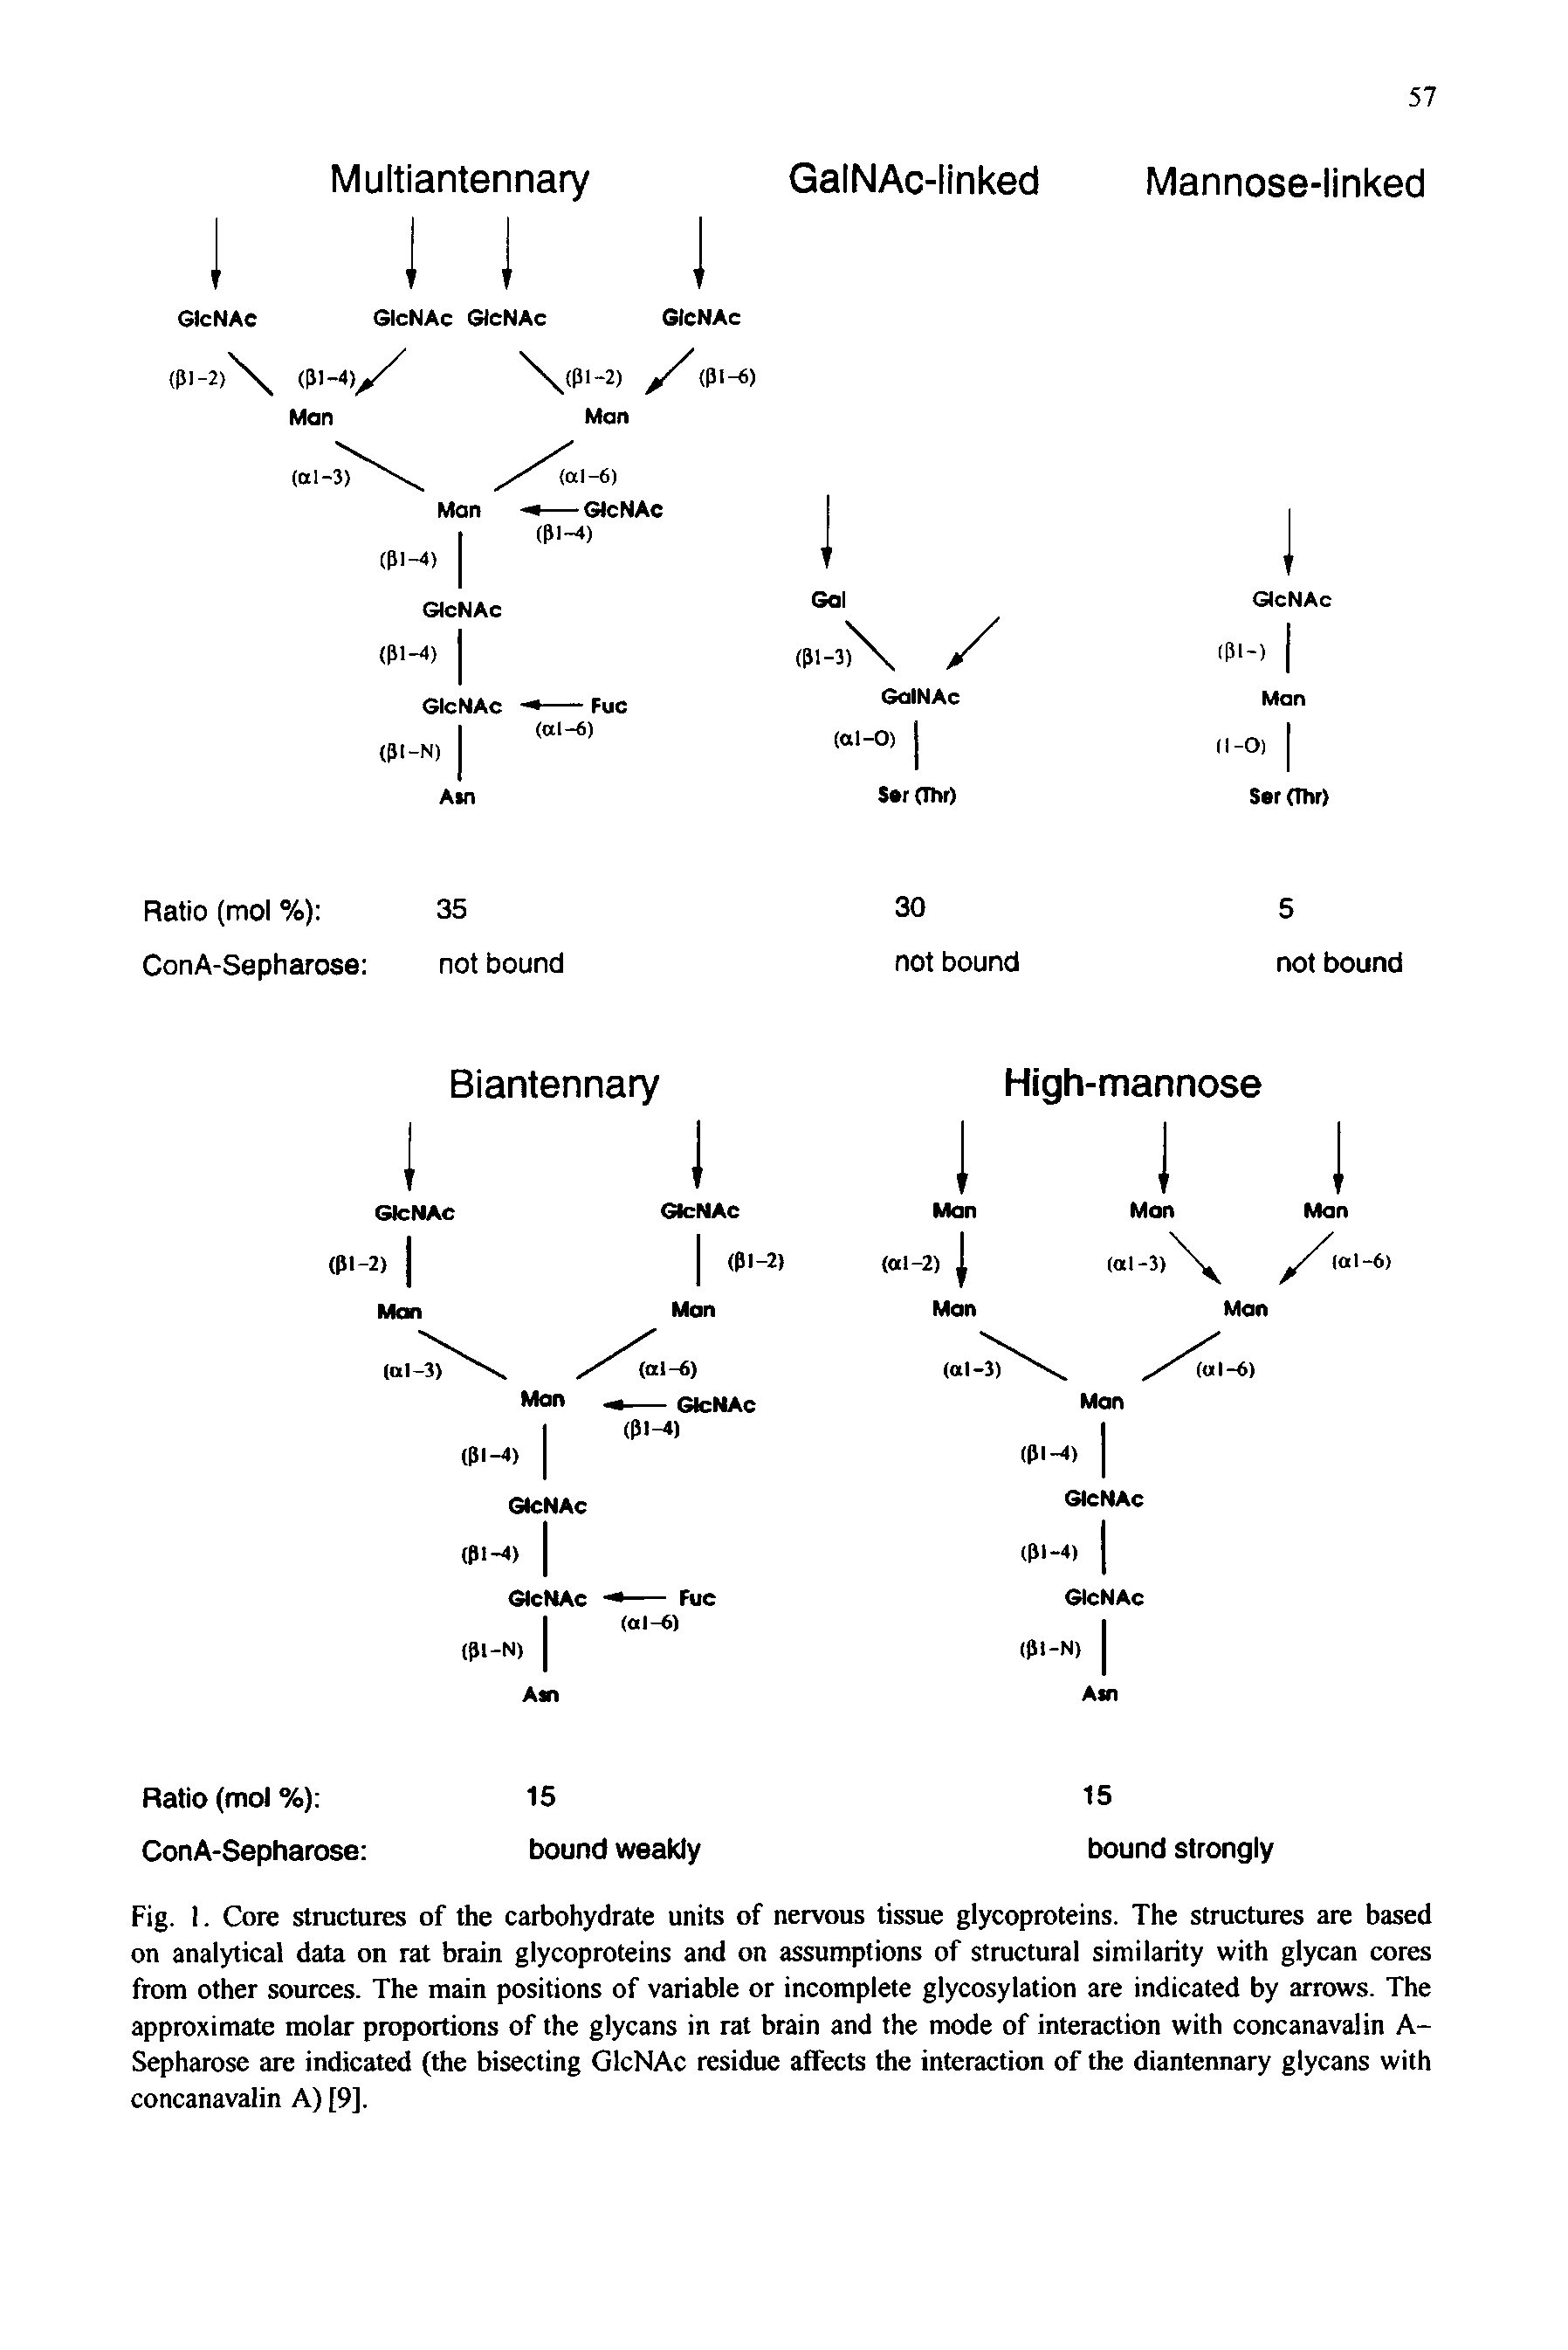 Fig. I. Core structures of the carbohydrate units of nervous tissue glycoproteins. The structures are based on analytical data on rat brain glycoproteins and on assumptions of structural similarity with glycan cores from other sources. The main positions of variable or incomplete glycosylation are indicated by arrows. The approximate molar proportions of the glycans in rat brain and the mode of interaction with concanavalin A-Sepharose are indicated (the bisecting GicNAc residue affects the interaction of the diantennary glycans with concanavalin A) [9].